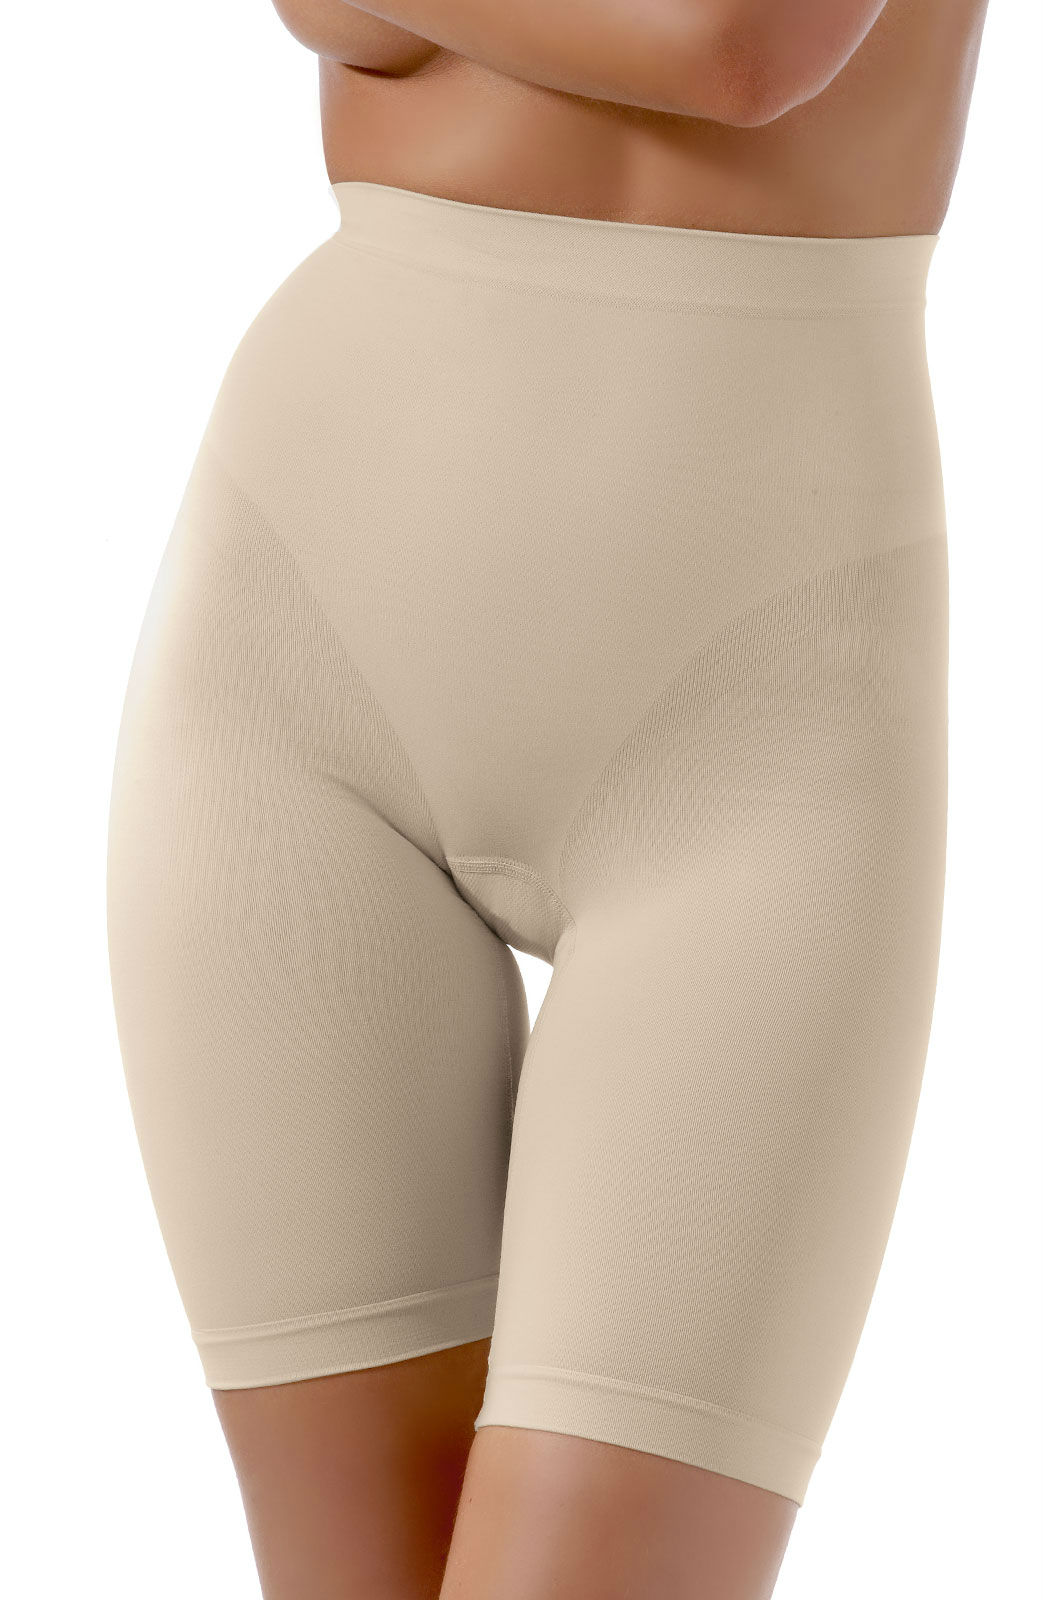 Picture of Control Body 410464 Girdle Skin